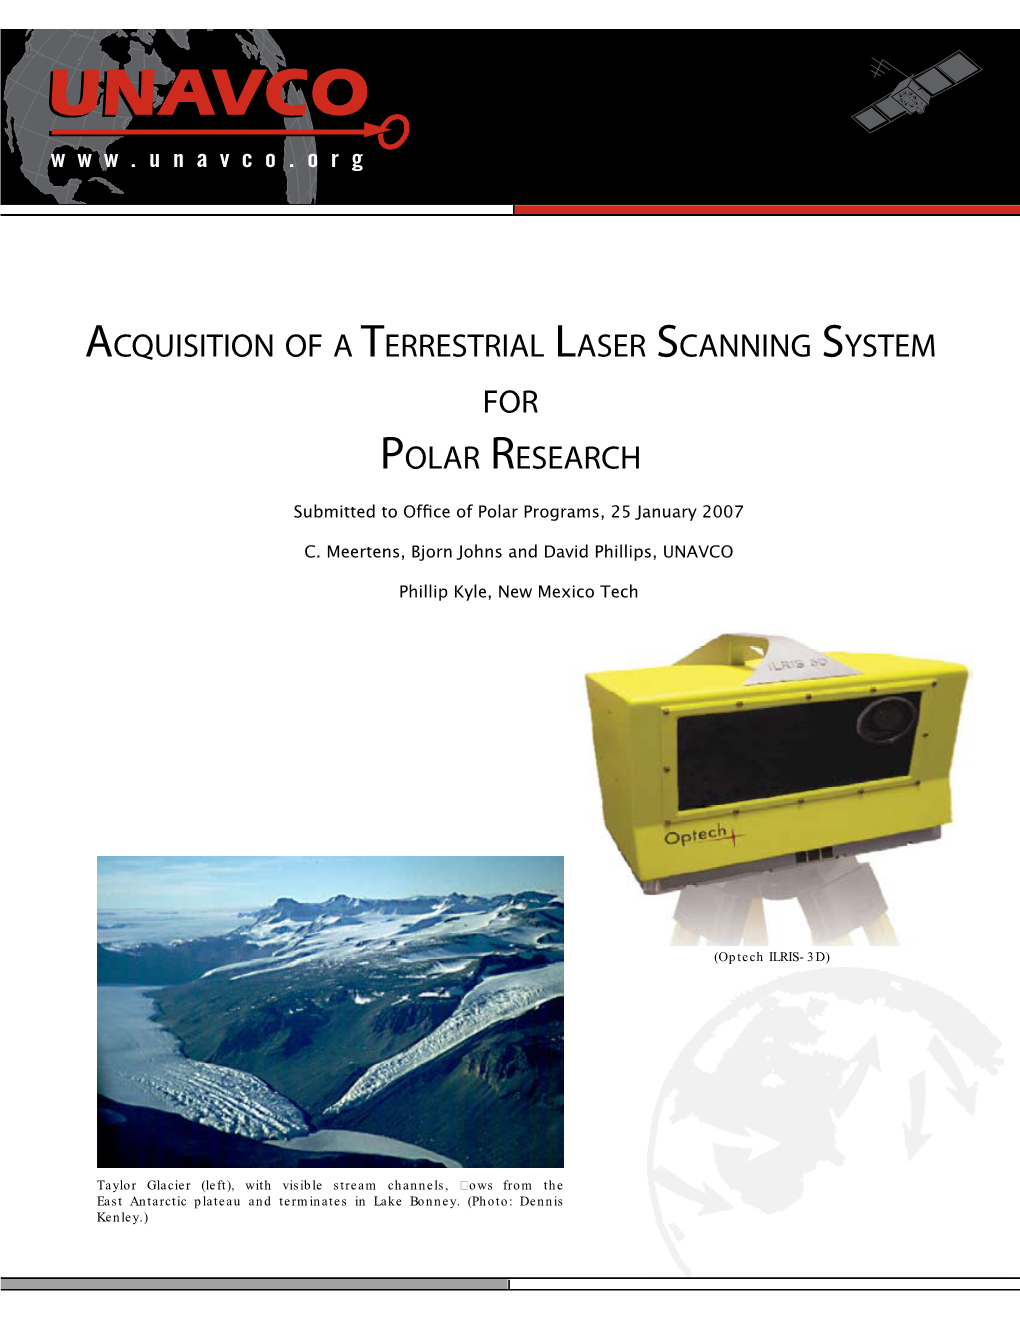 Aquisition of a Terrestrial Laser Scanning System for Polar Research